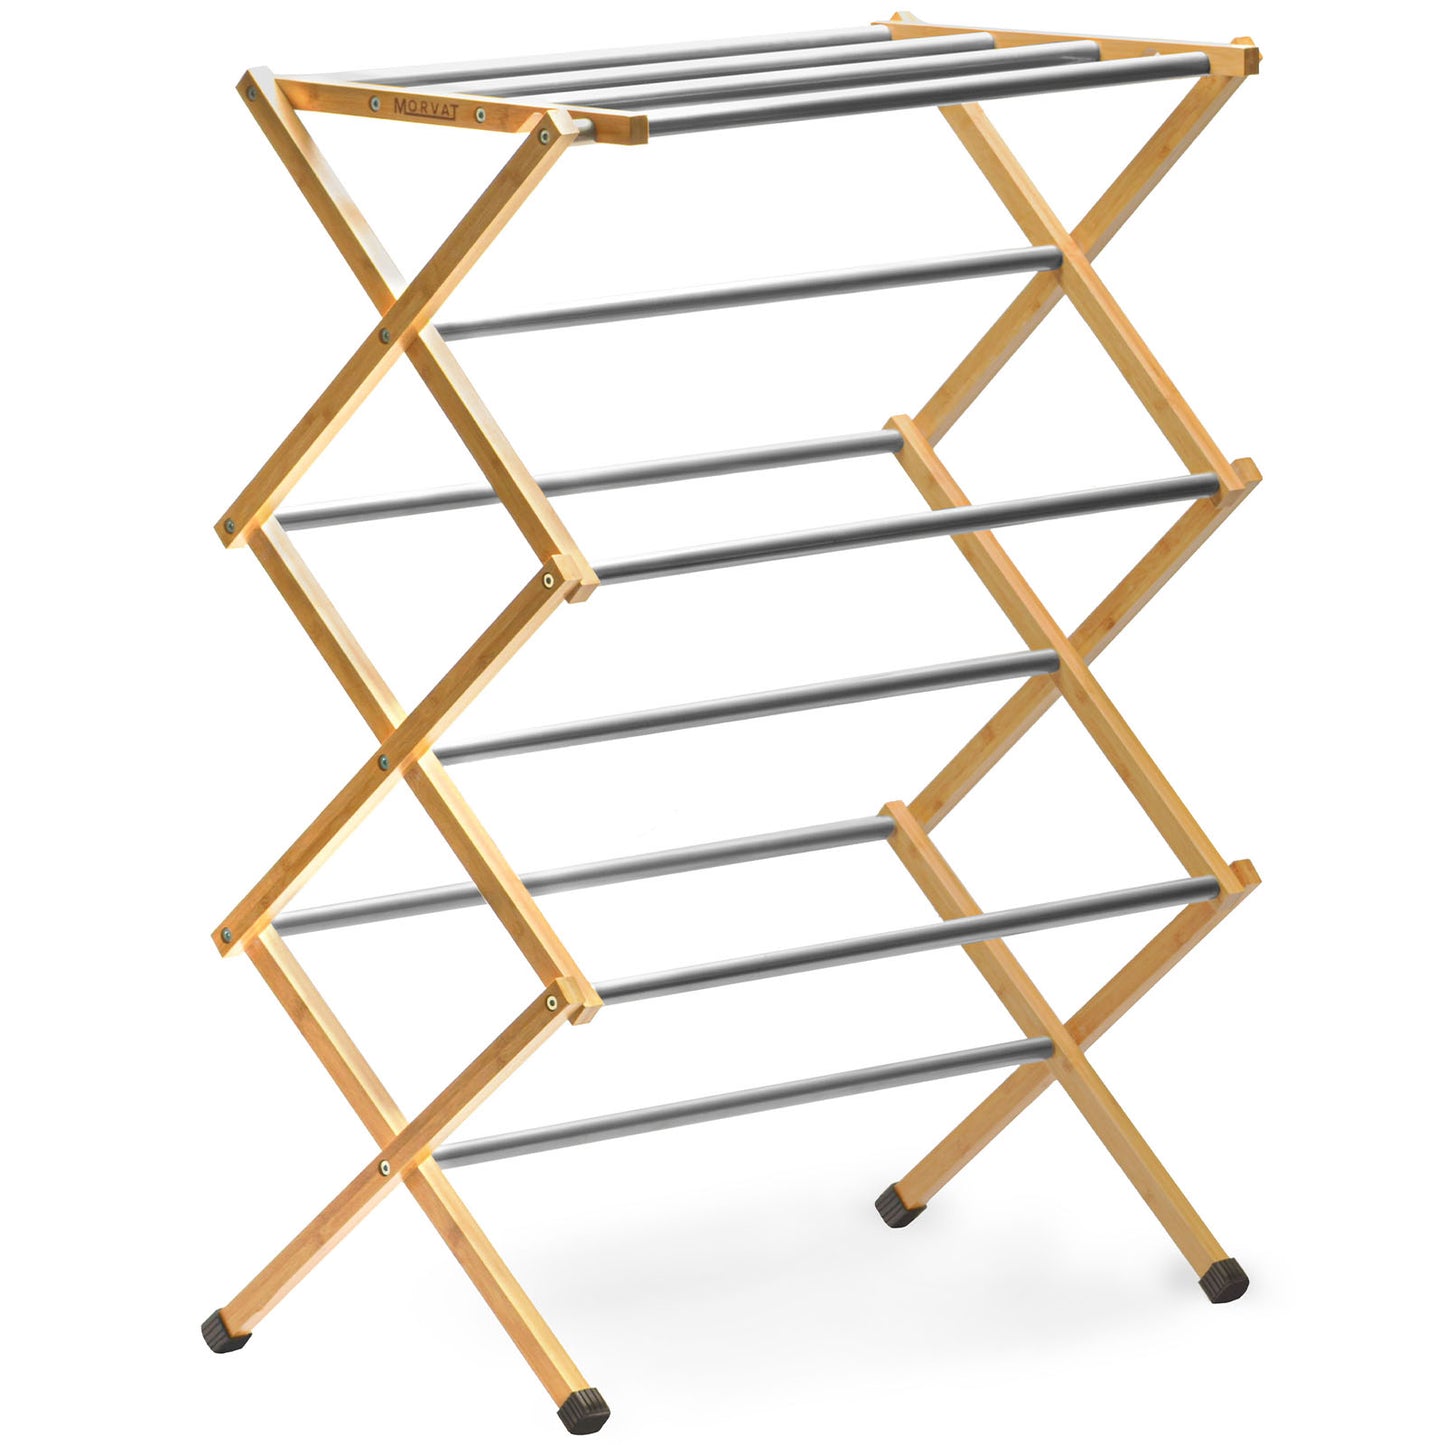 
                  
                    Morvat Bamboo Adjustable Laundry Drying Rack with Steel Bars, 23FT
                  
                